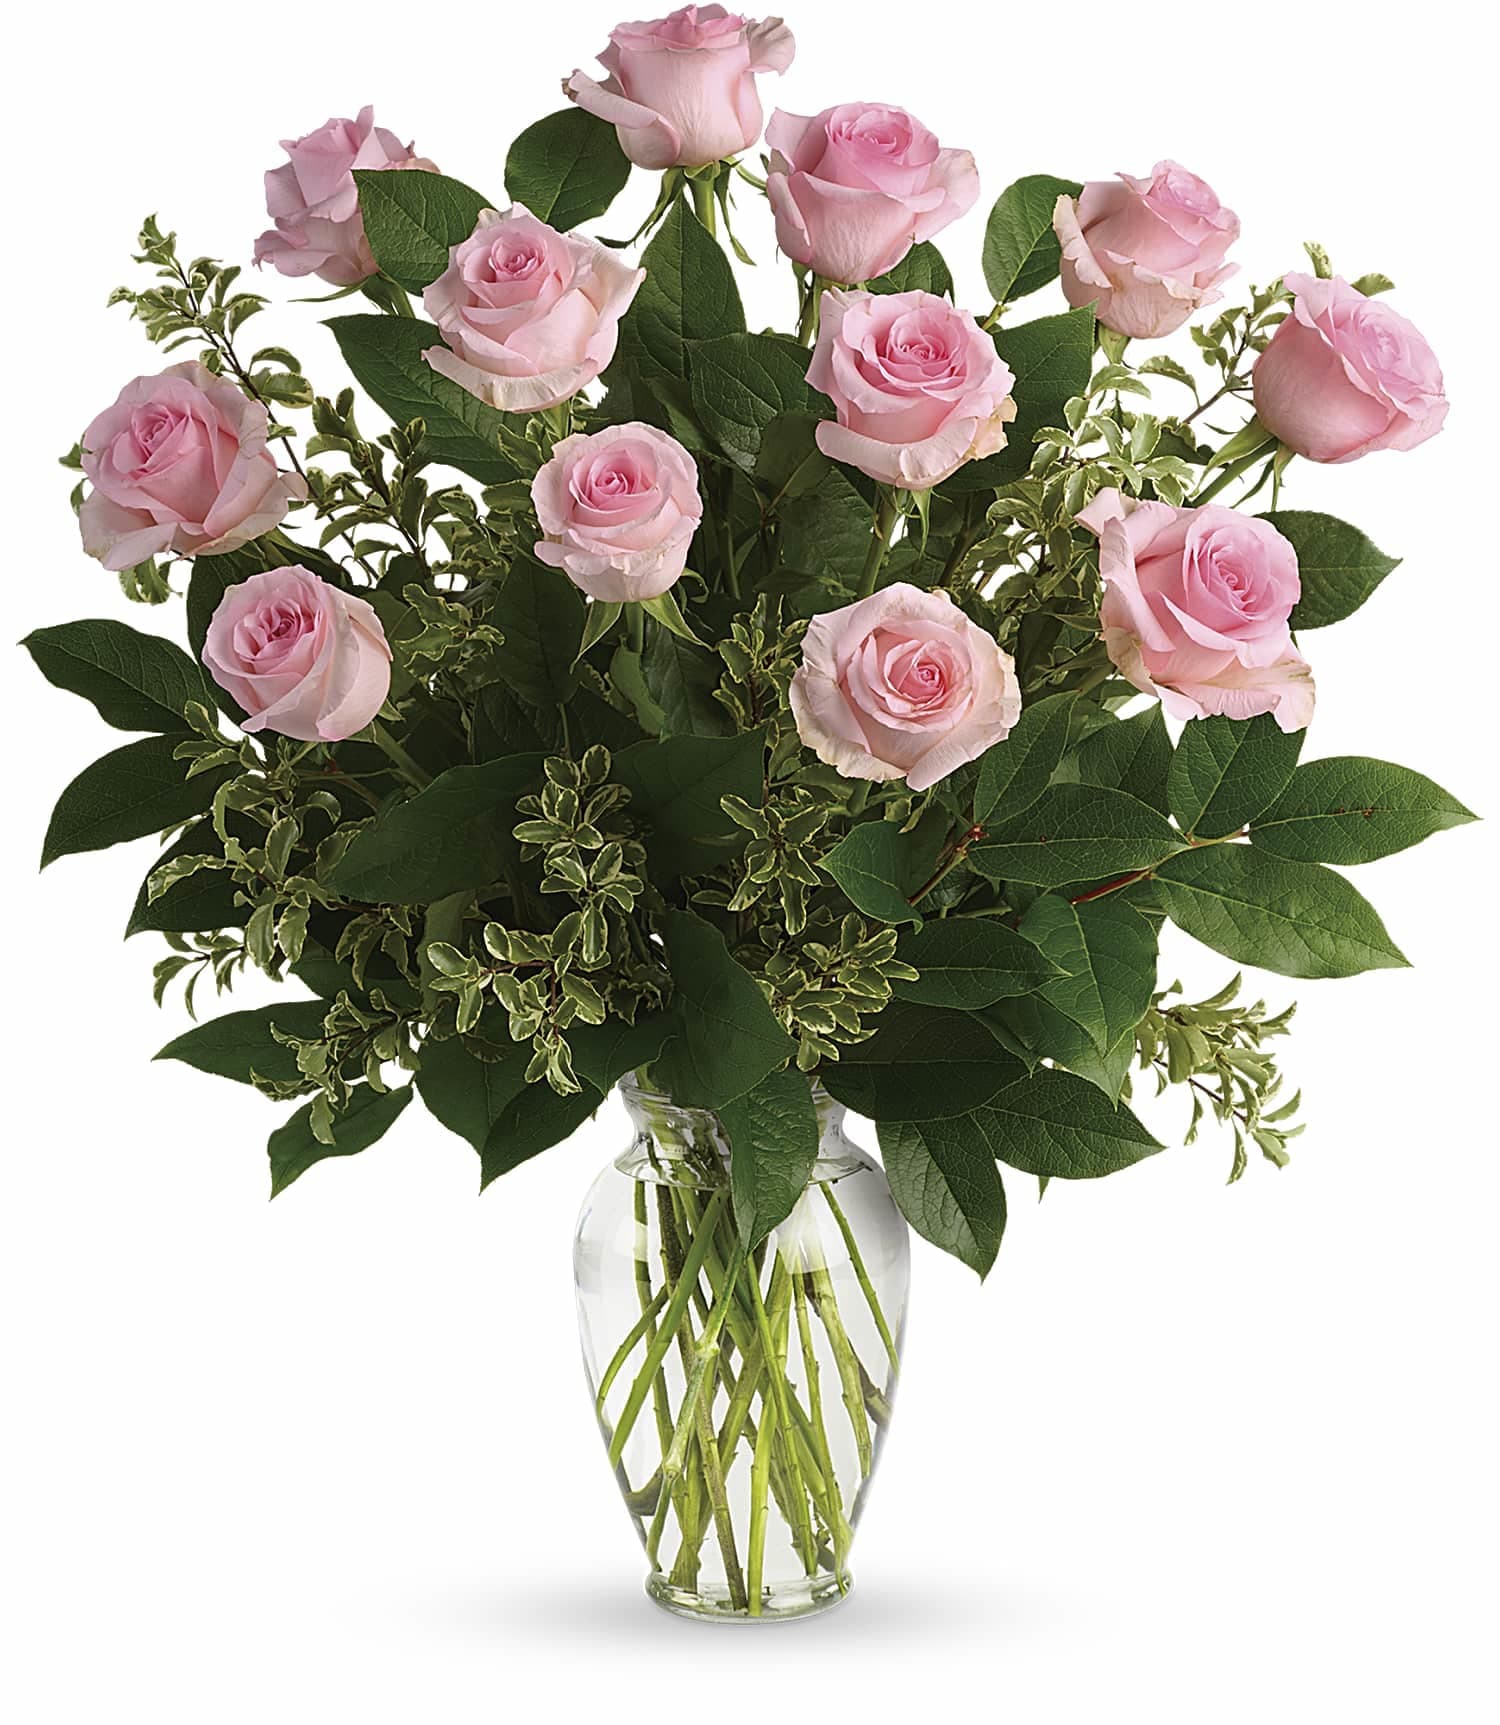 Say Something Sweet Bouquet - Say it sweeter with this feminine bouquet of a dozen ballet pink roses and lush greens in a graceful glass vase. 